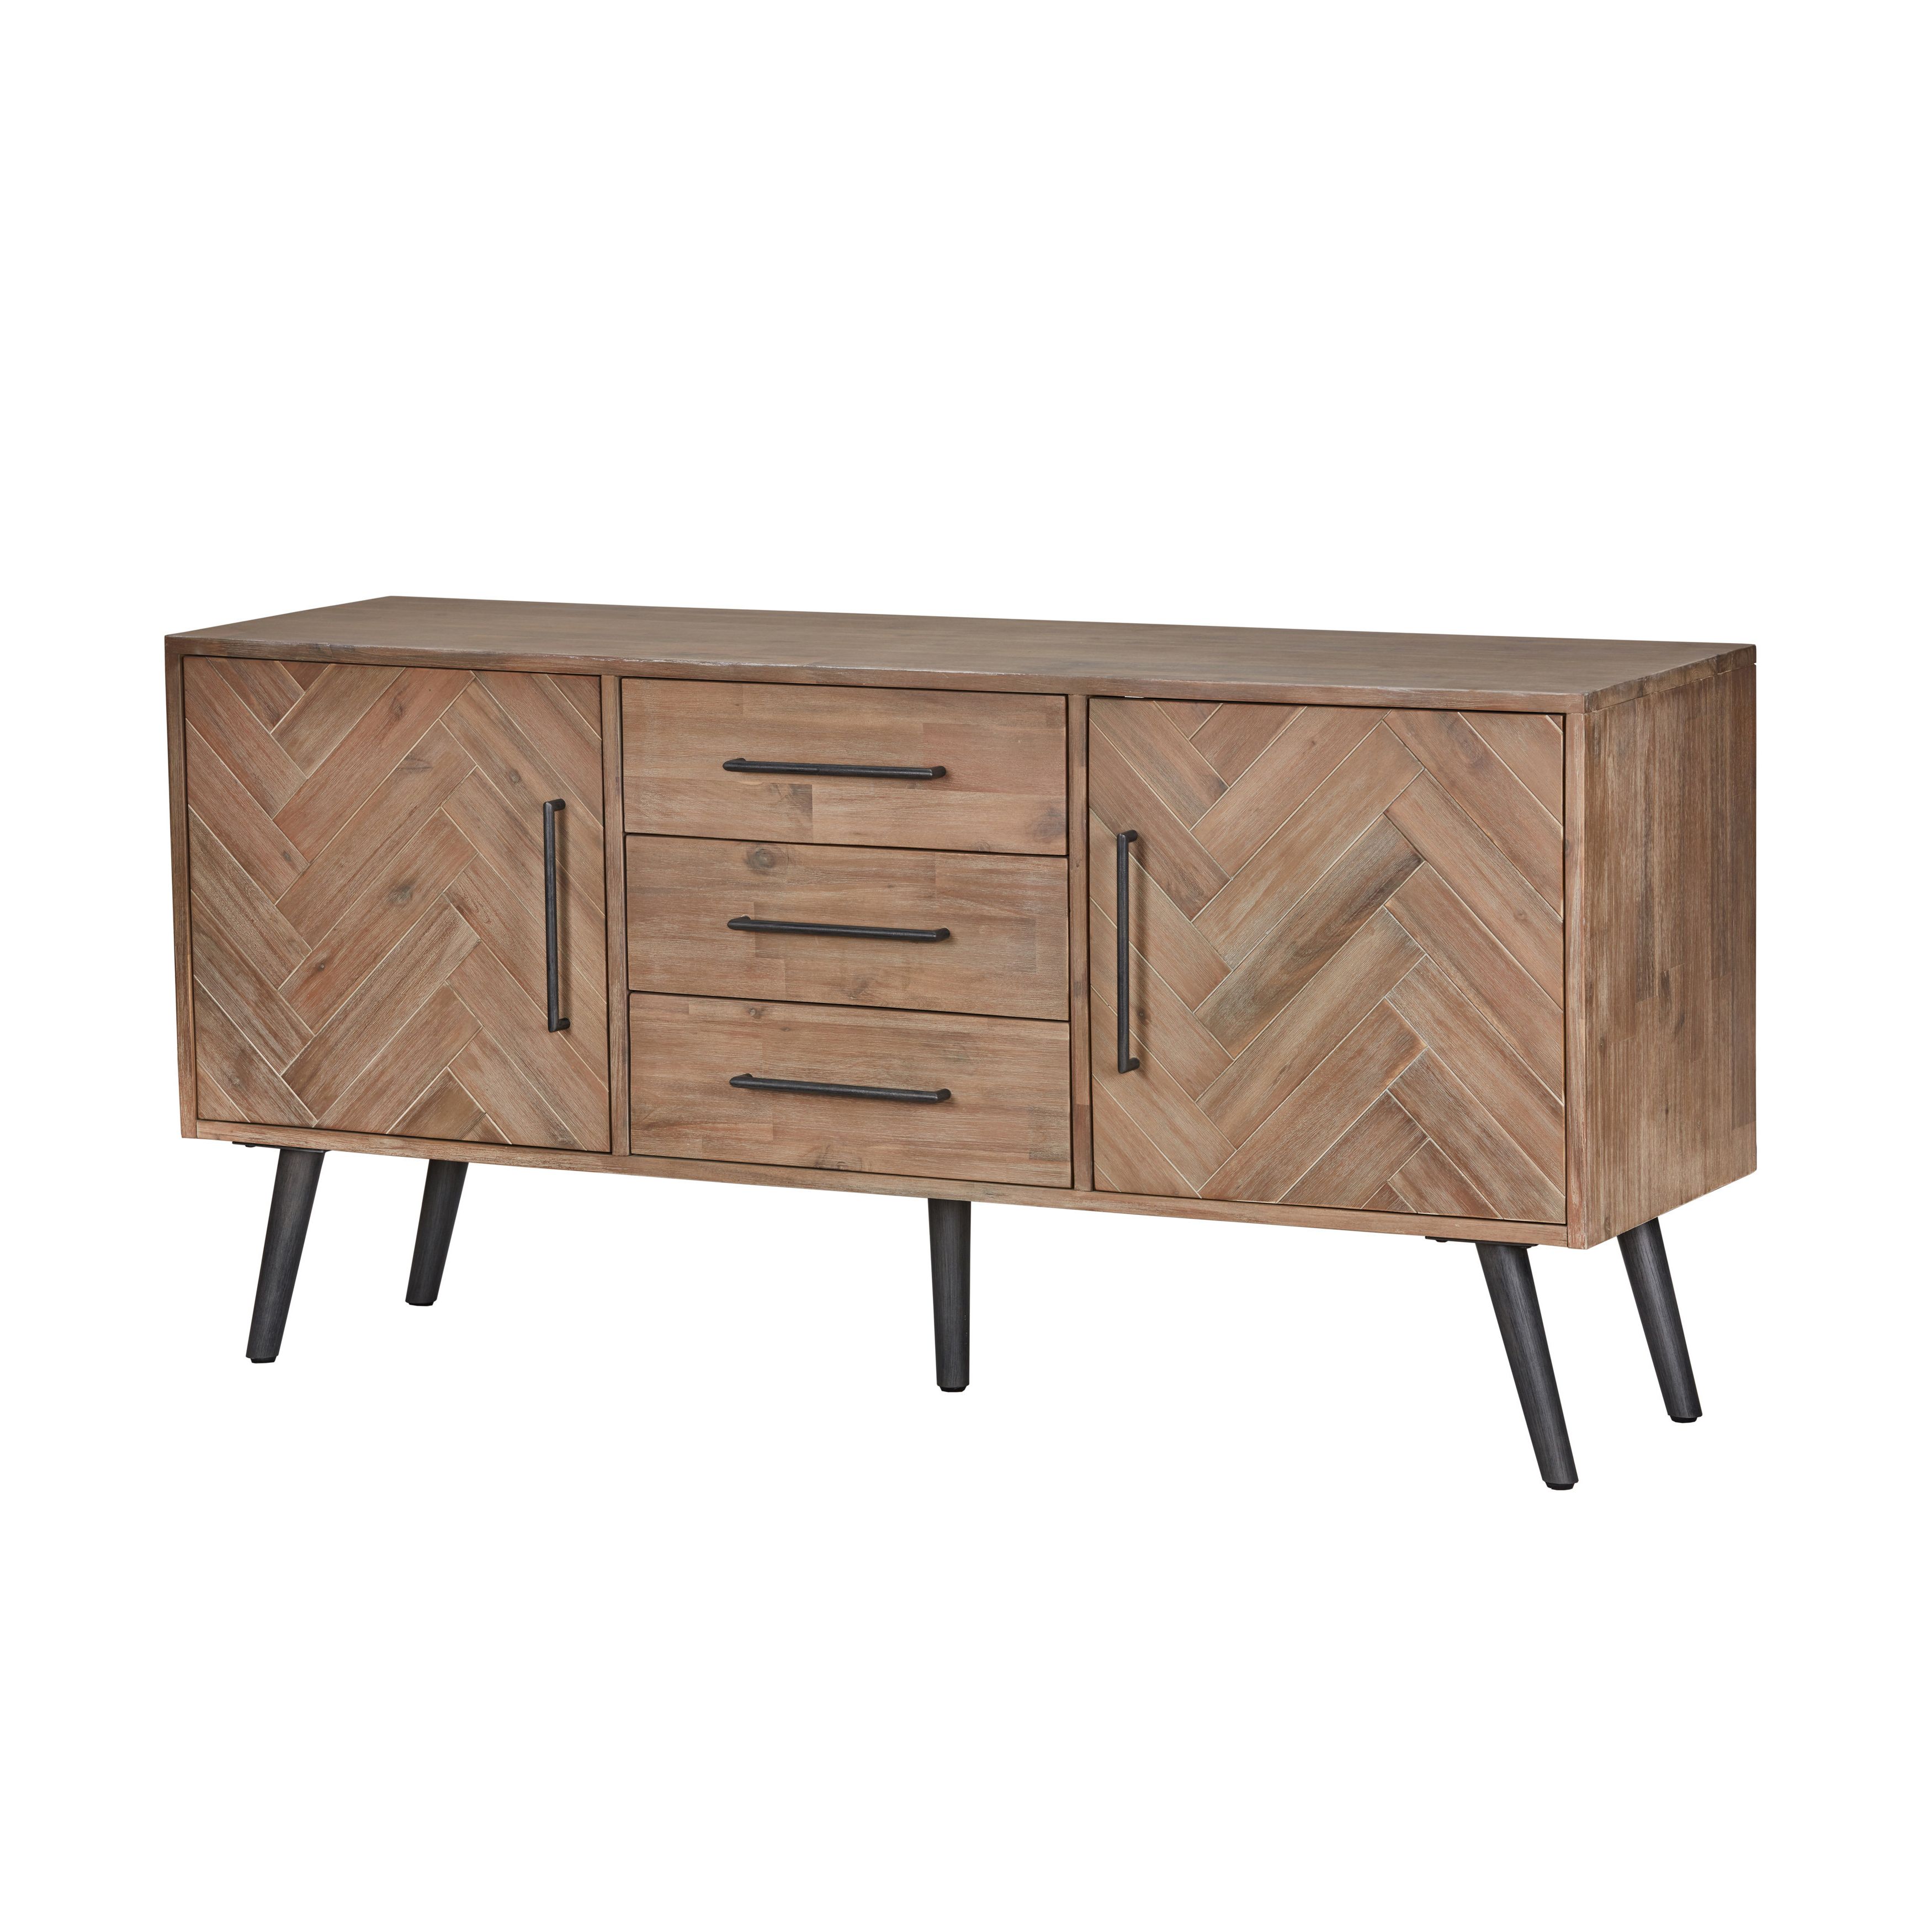 Extra Long Credenza You'll Love In 2019 | Wayfair Throughout Pink And Navy Peaks Credenzas (View 17 of 20)